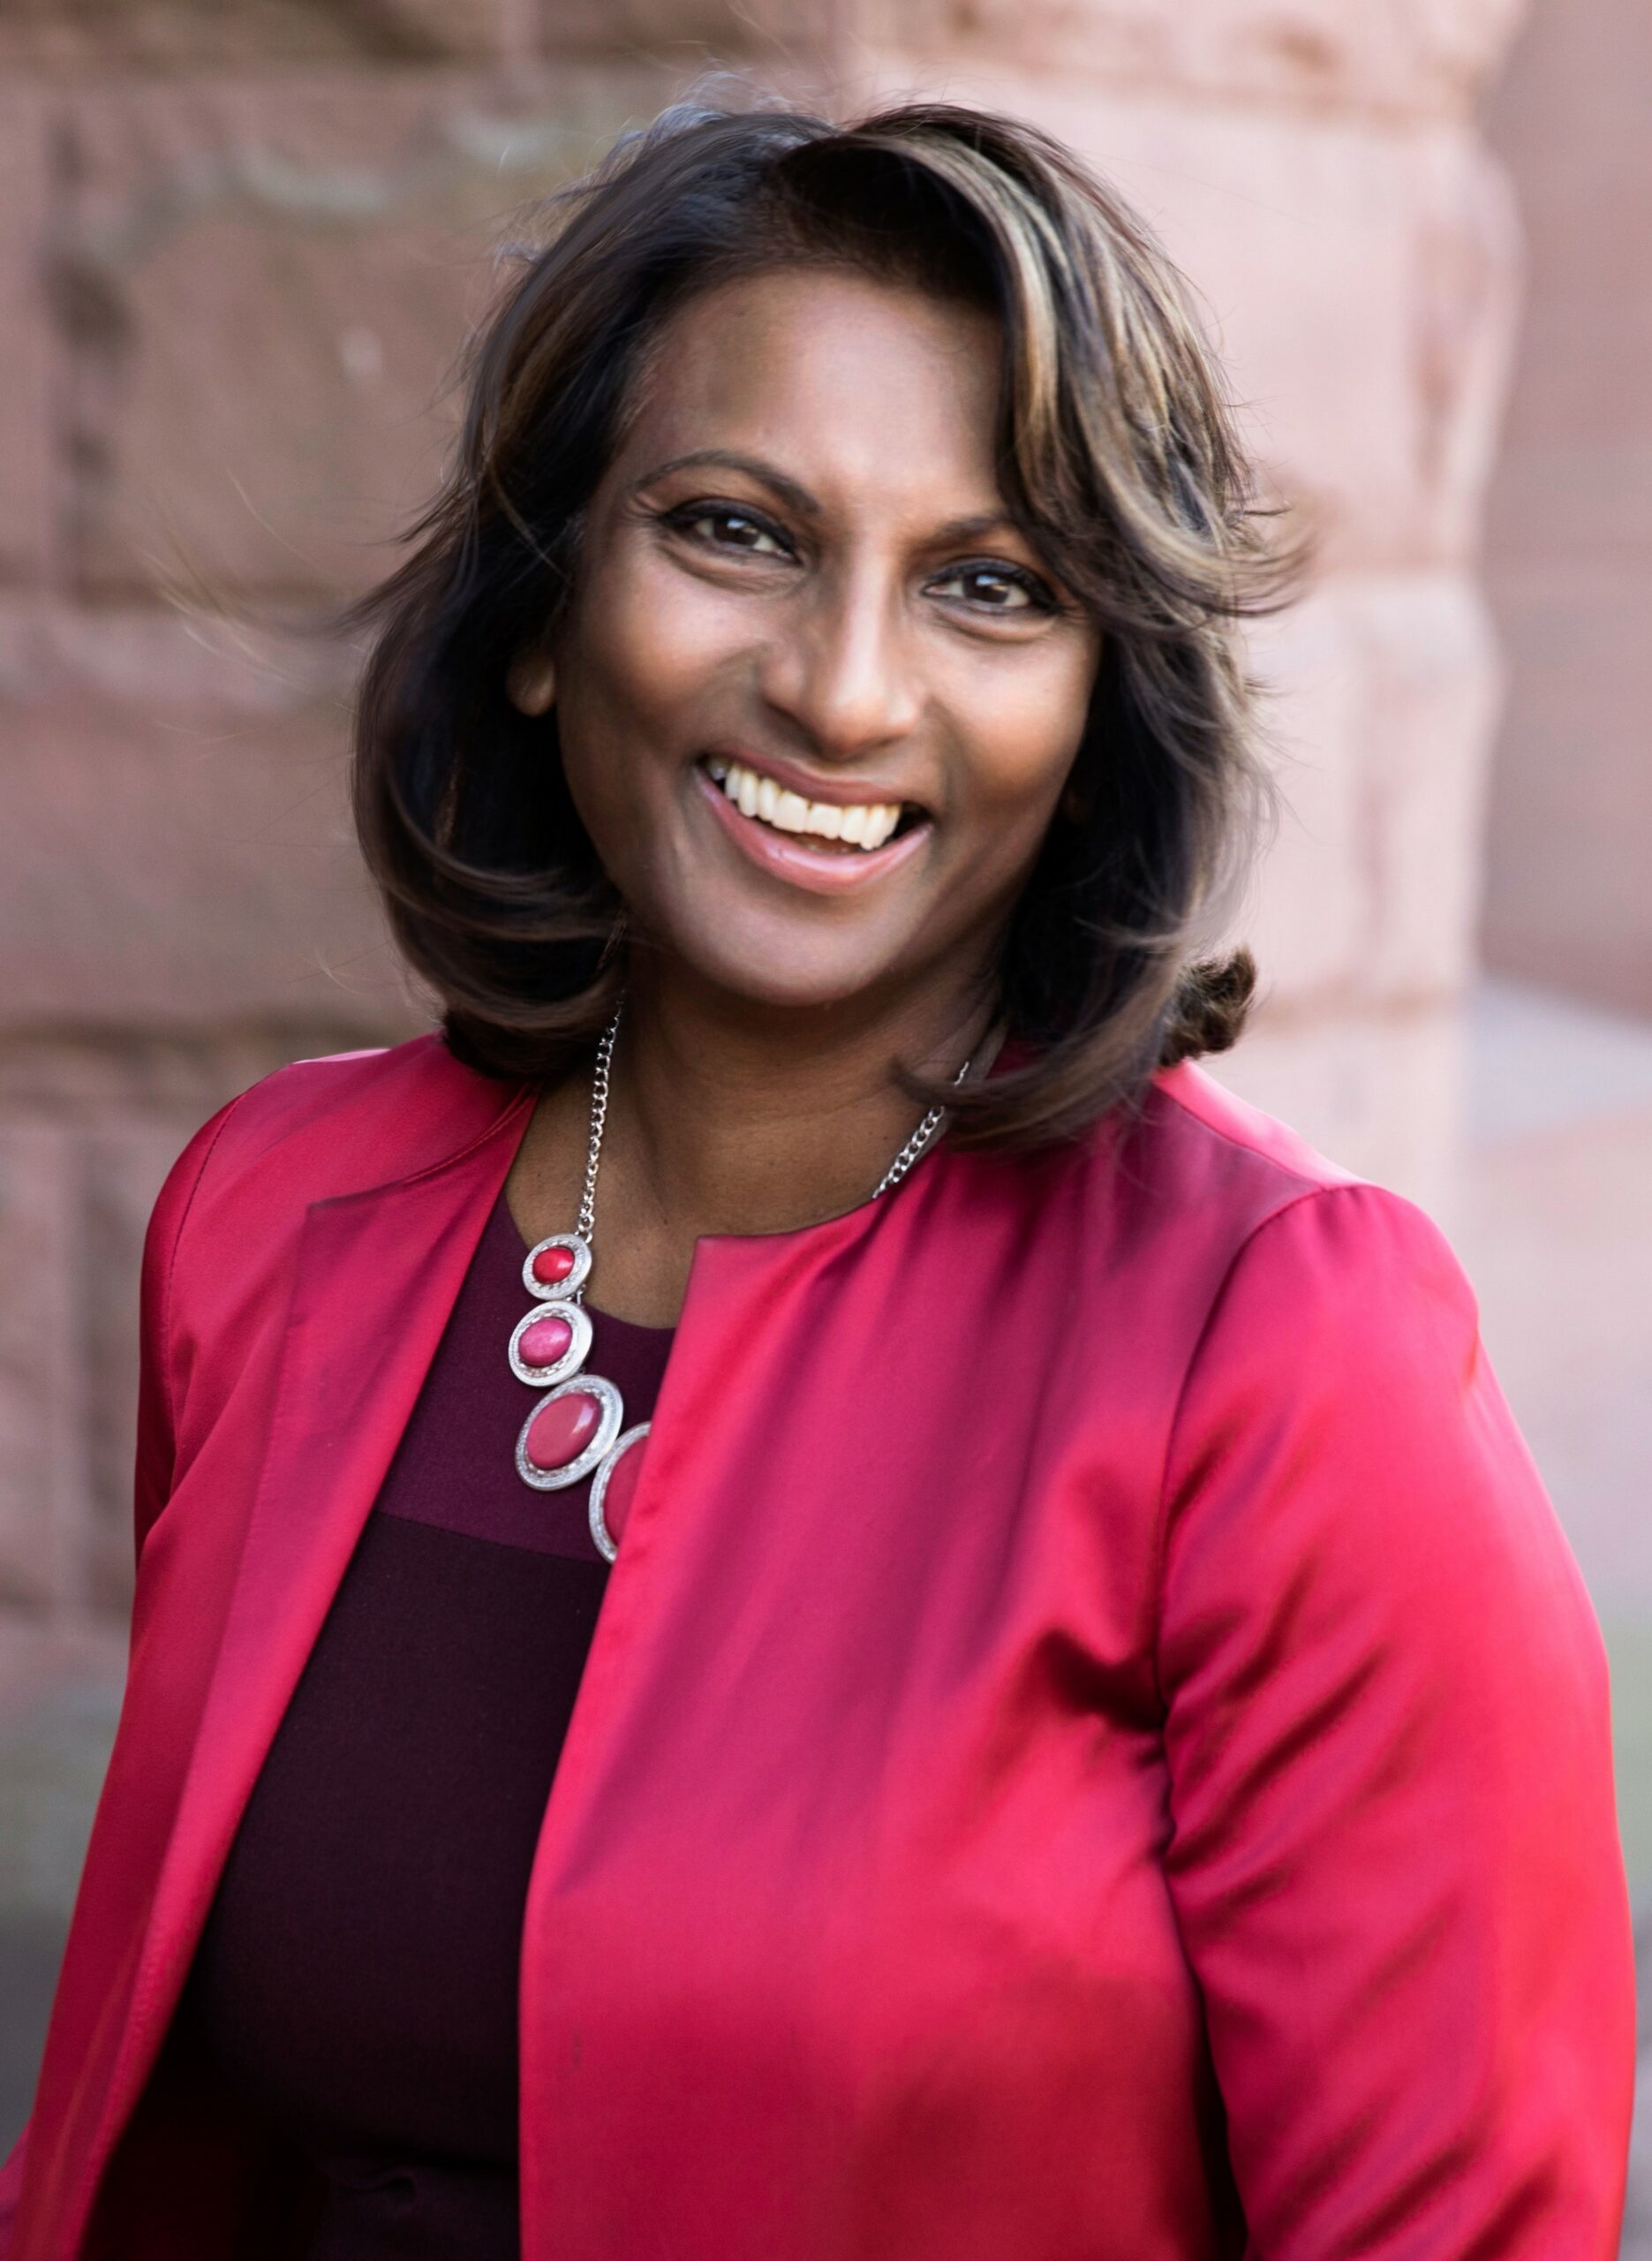 <hr></hr>
Indira Naidoo-Harris
<br>Assistant Vice President, Diversity and Human Rights
<br>University of Guelph